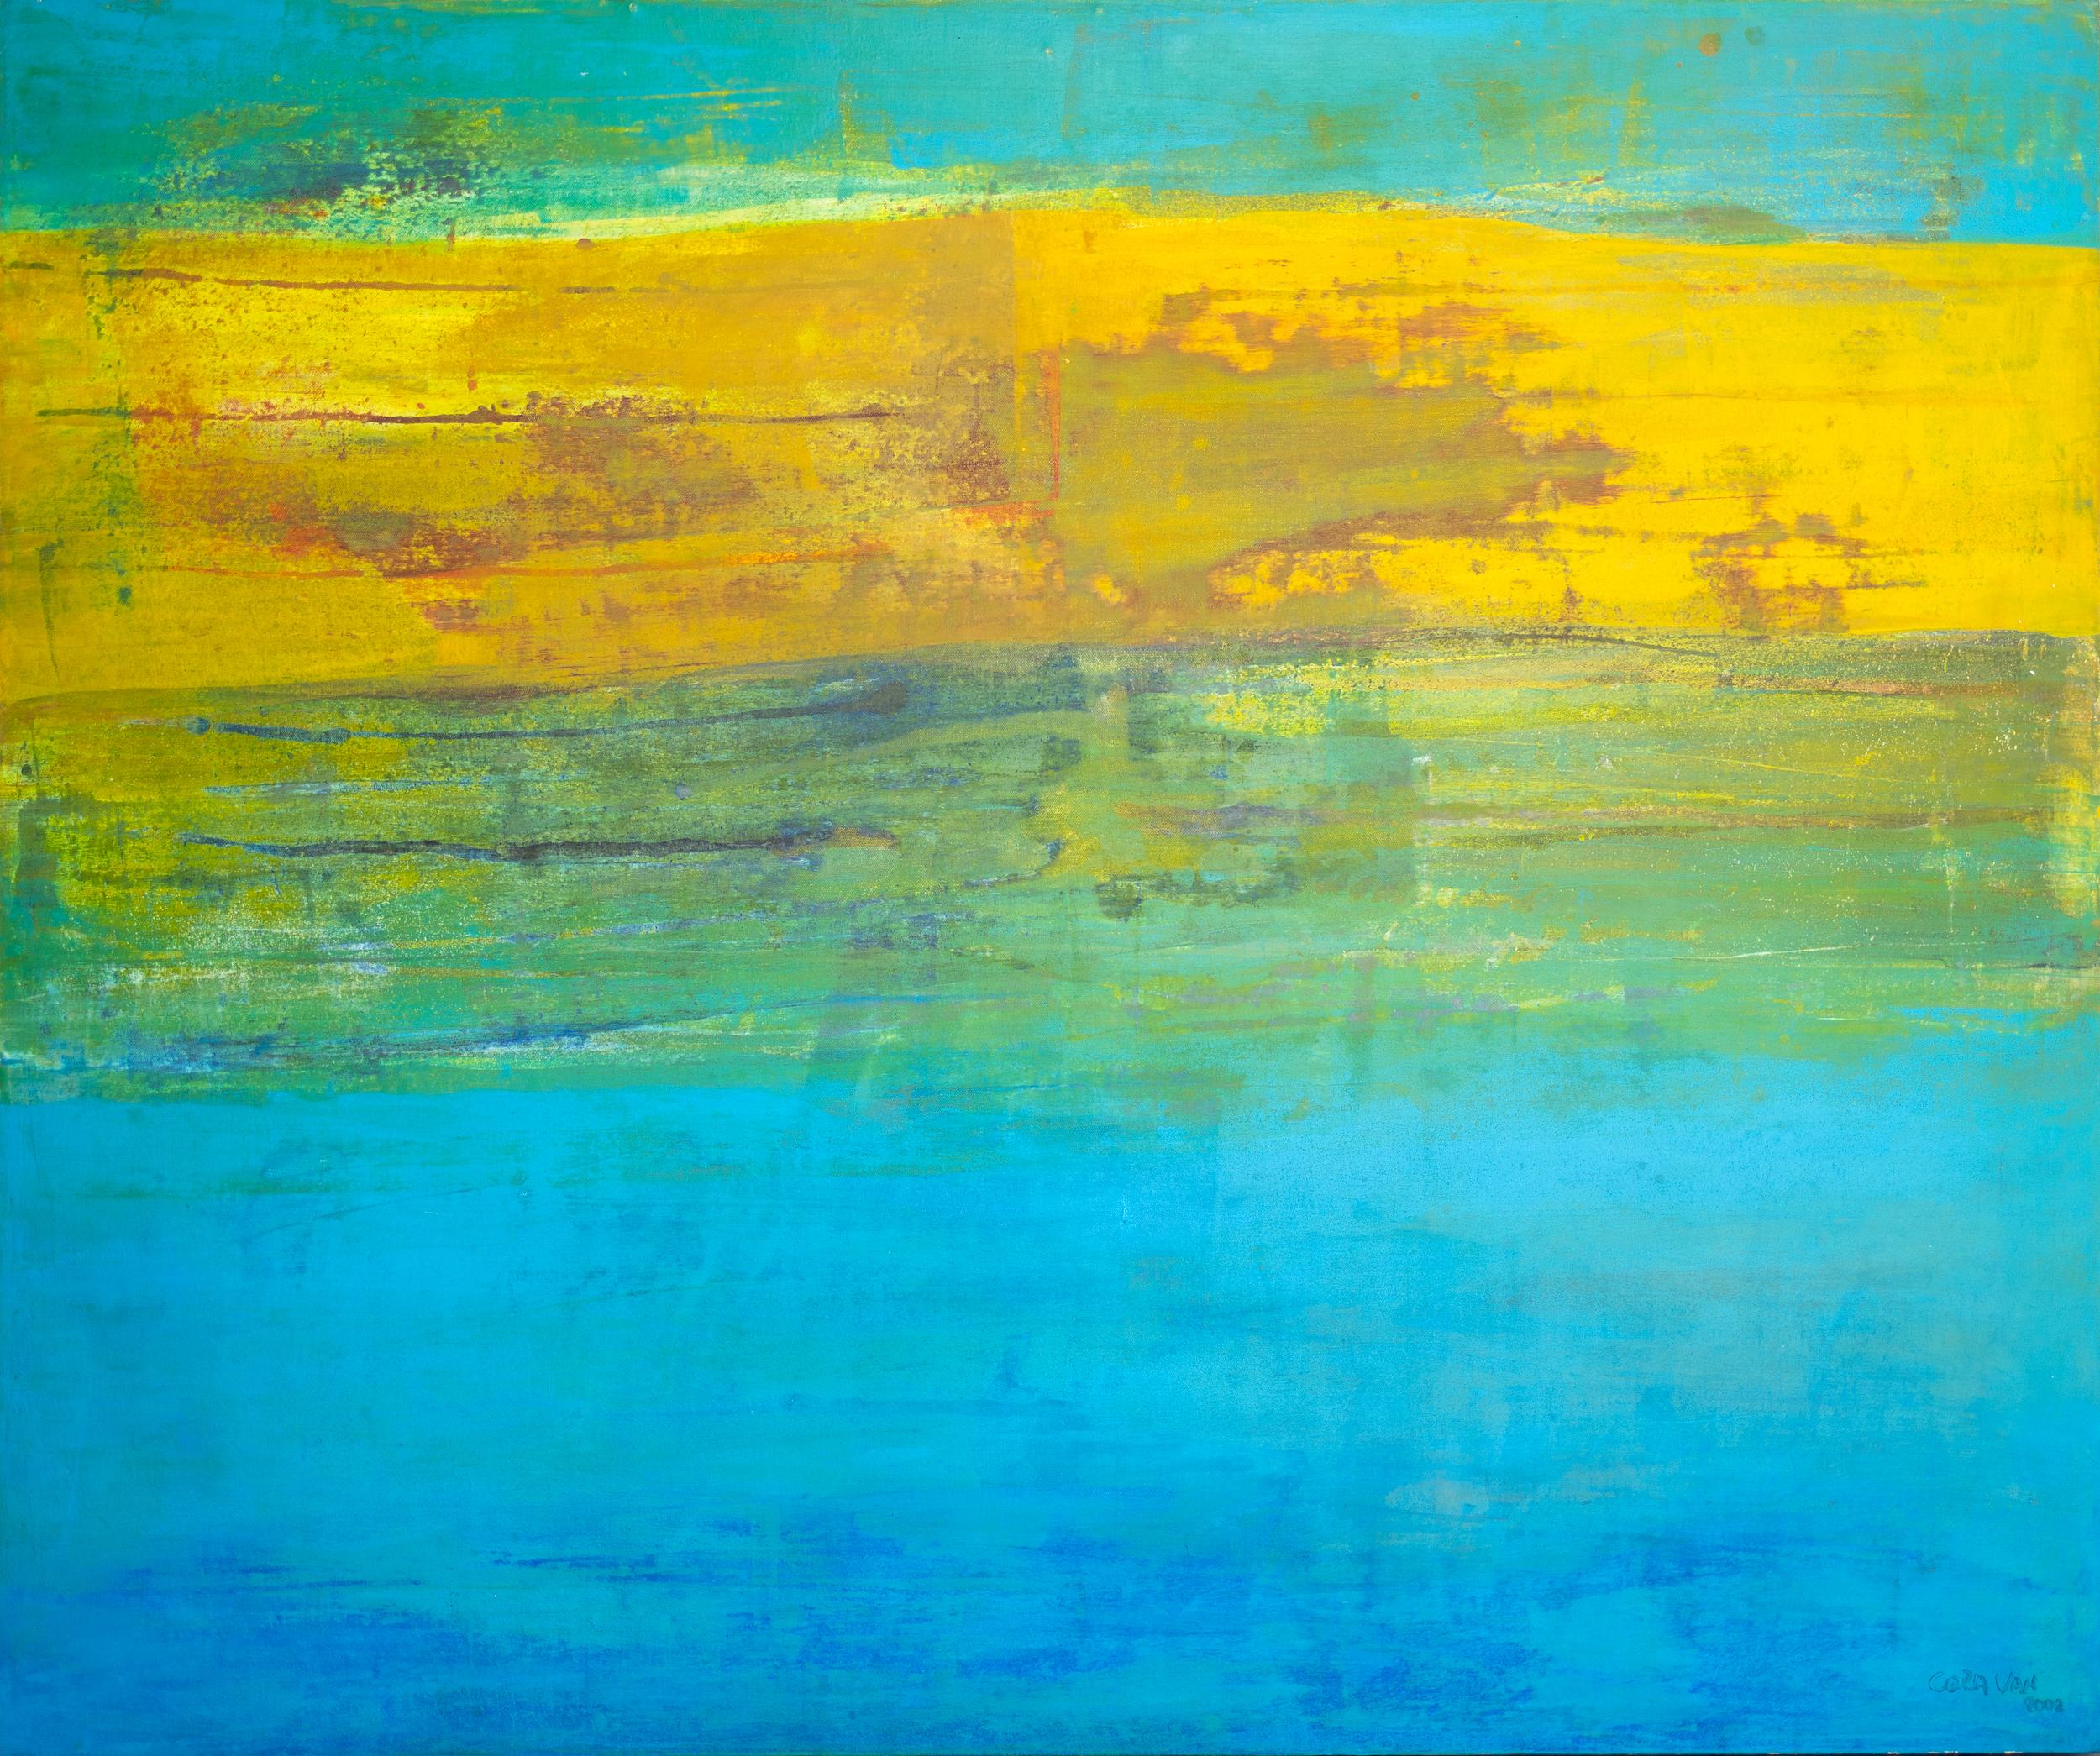 Blue, Green, and Yellow Gestural Abstract